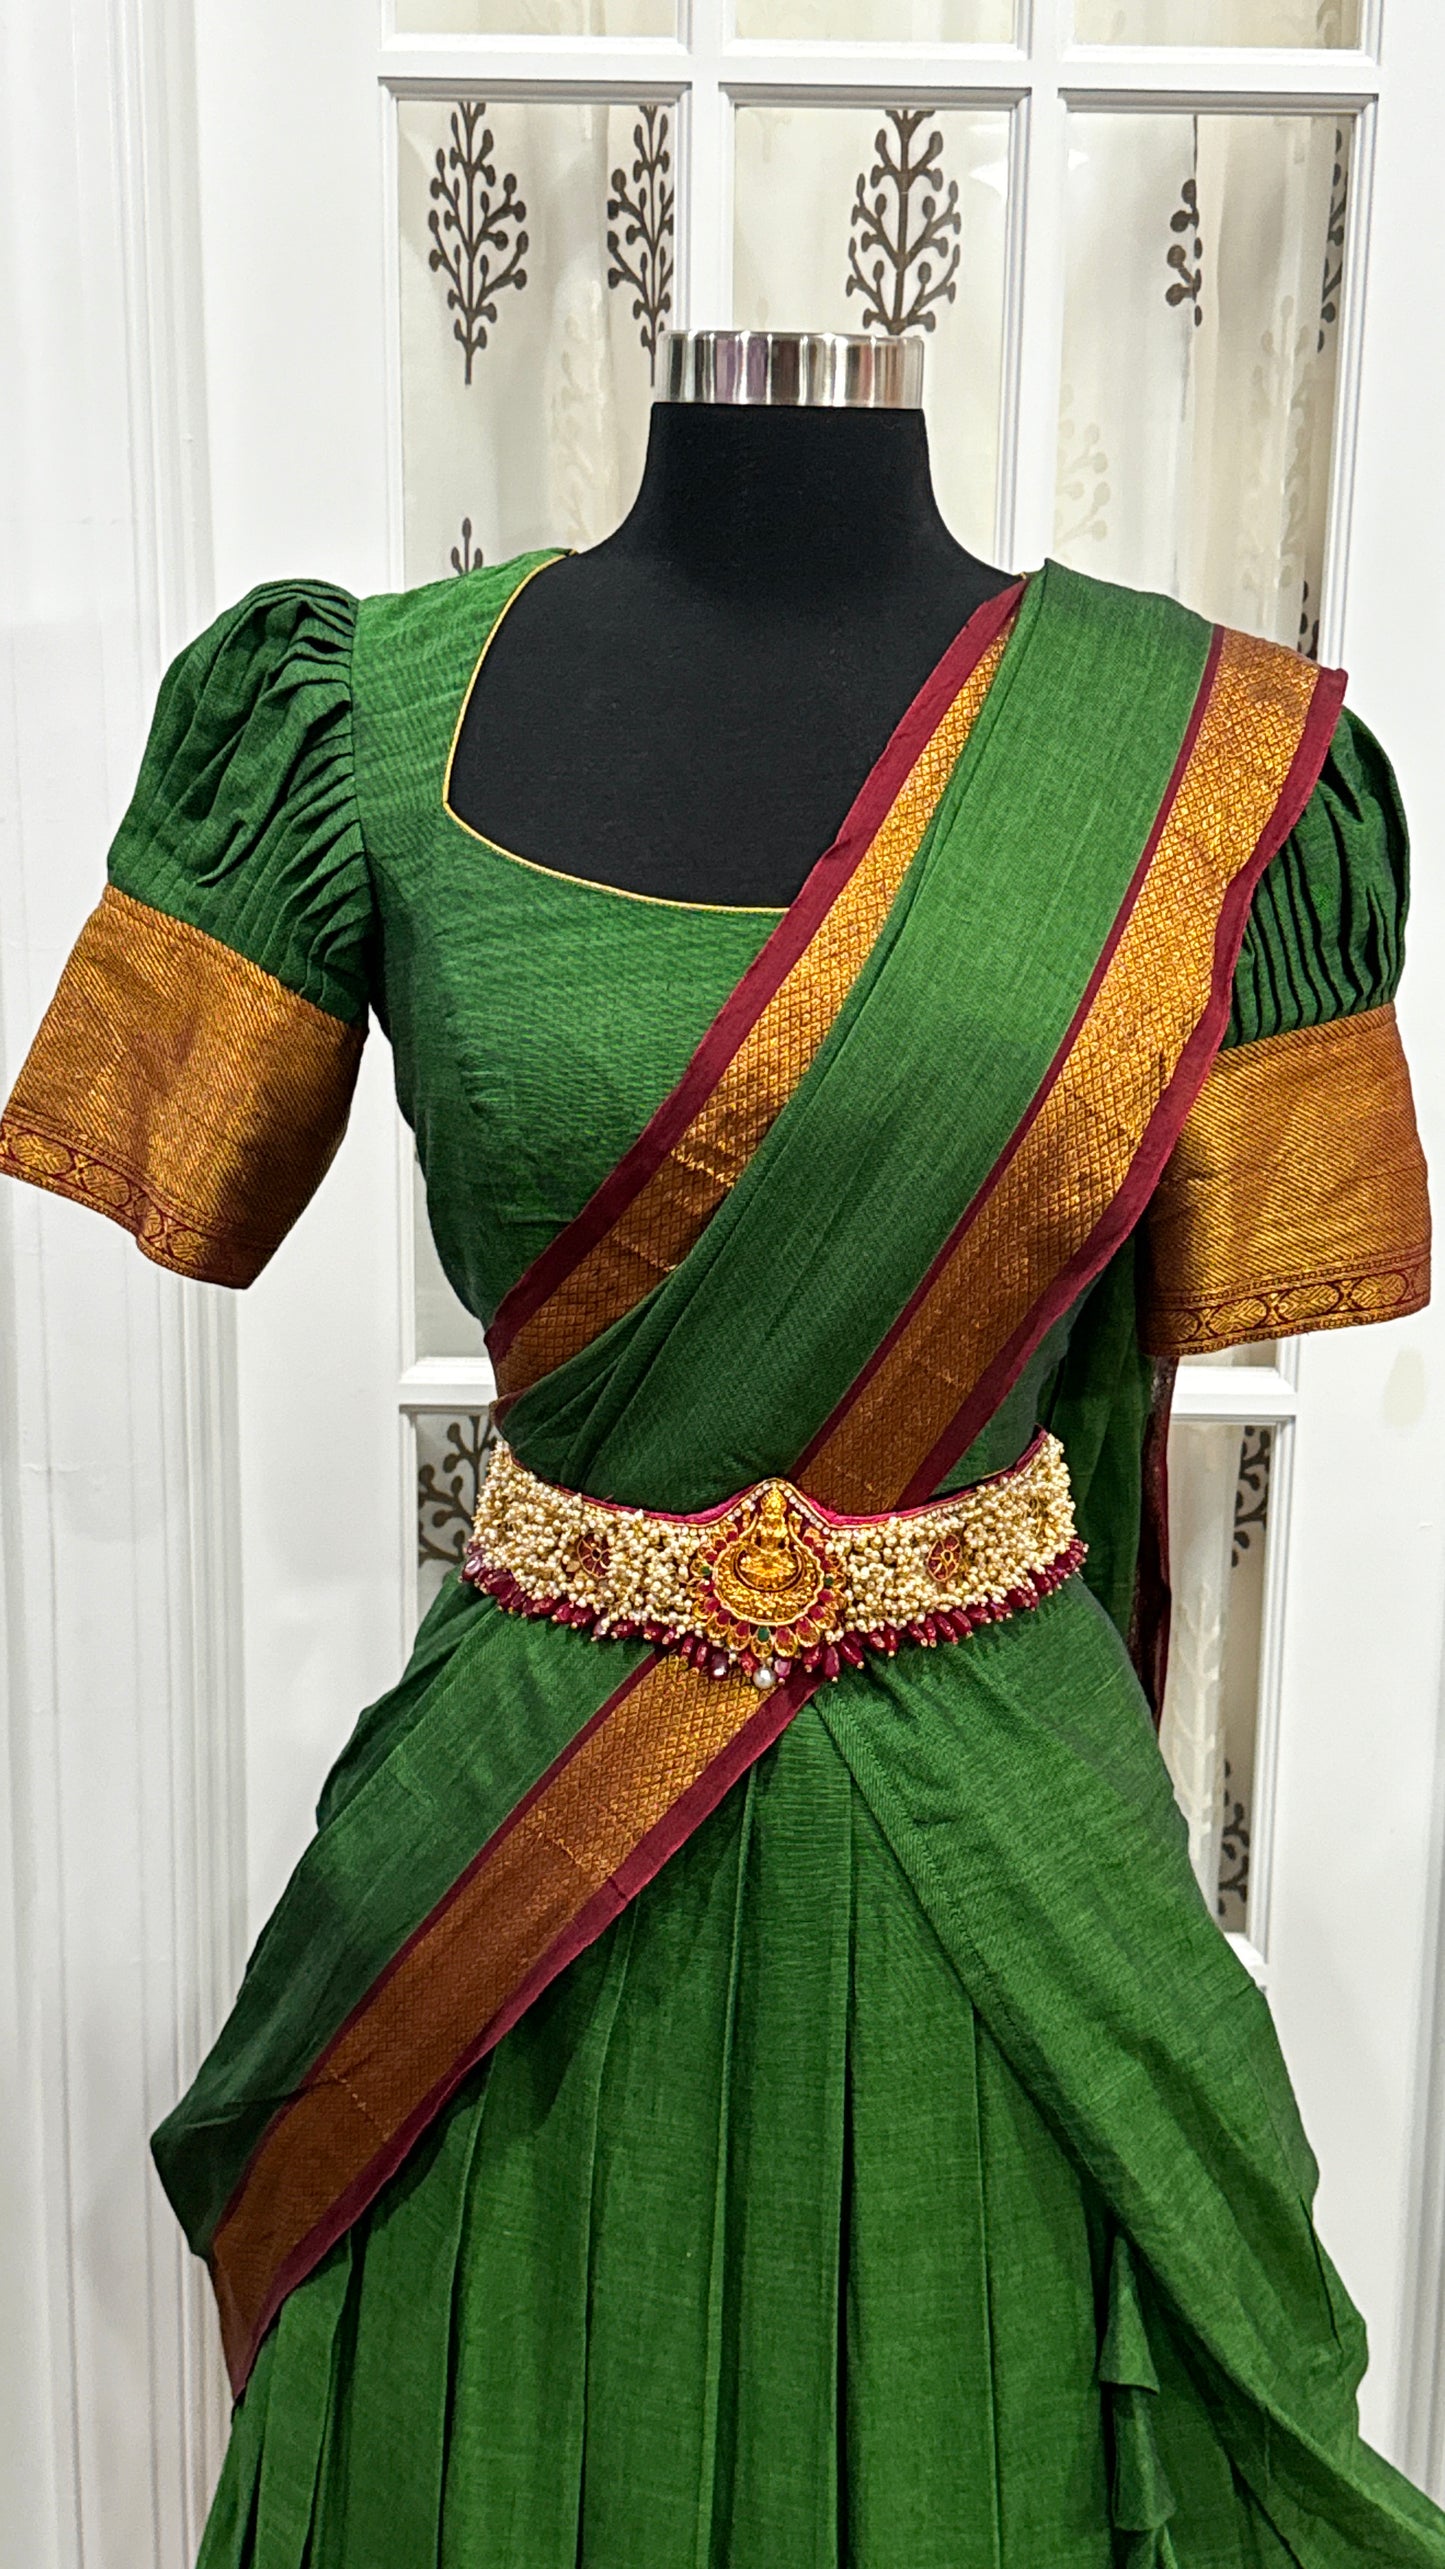 Elegant NarayanPet cotton Half Saree in parrot green and maroon color combo with zari border for Teens/Adults